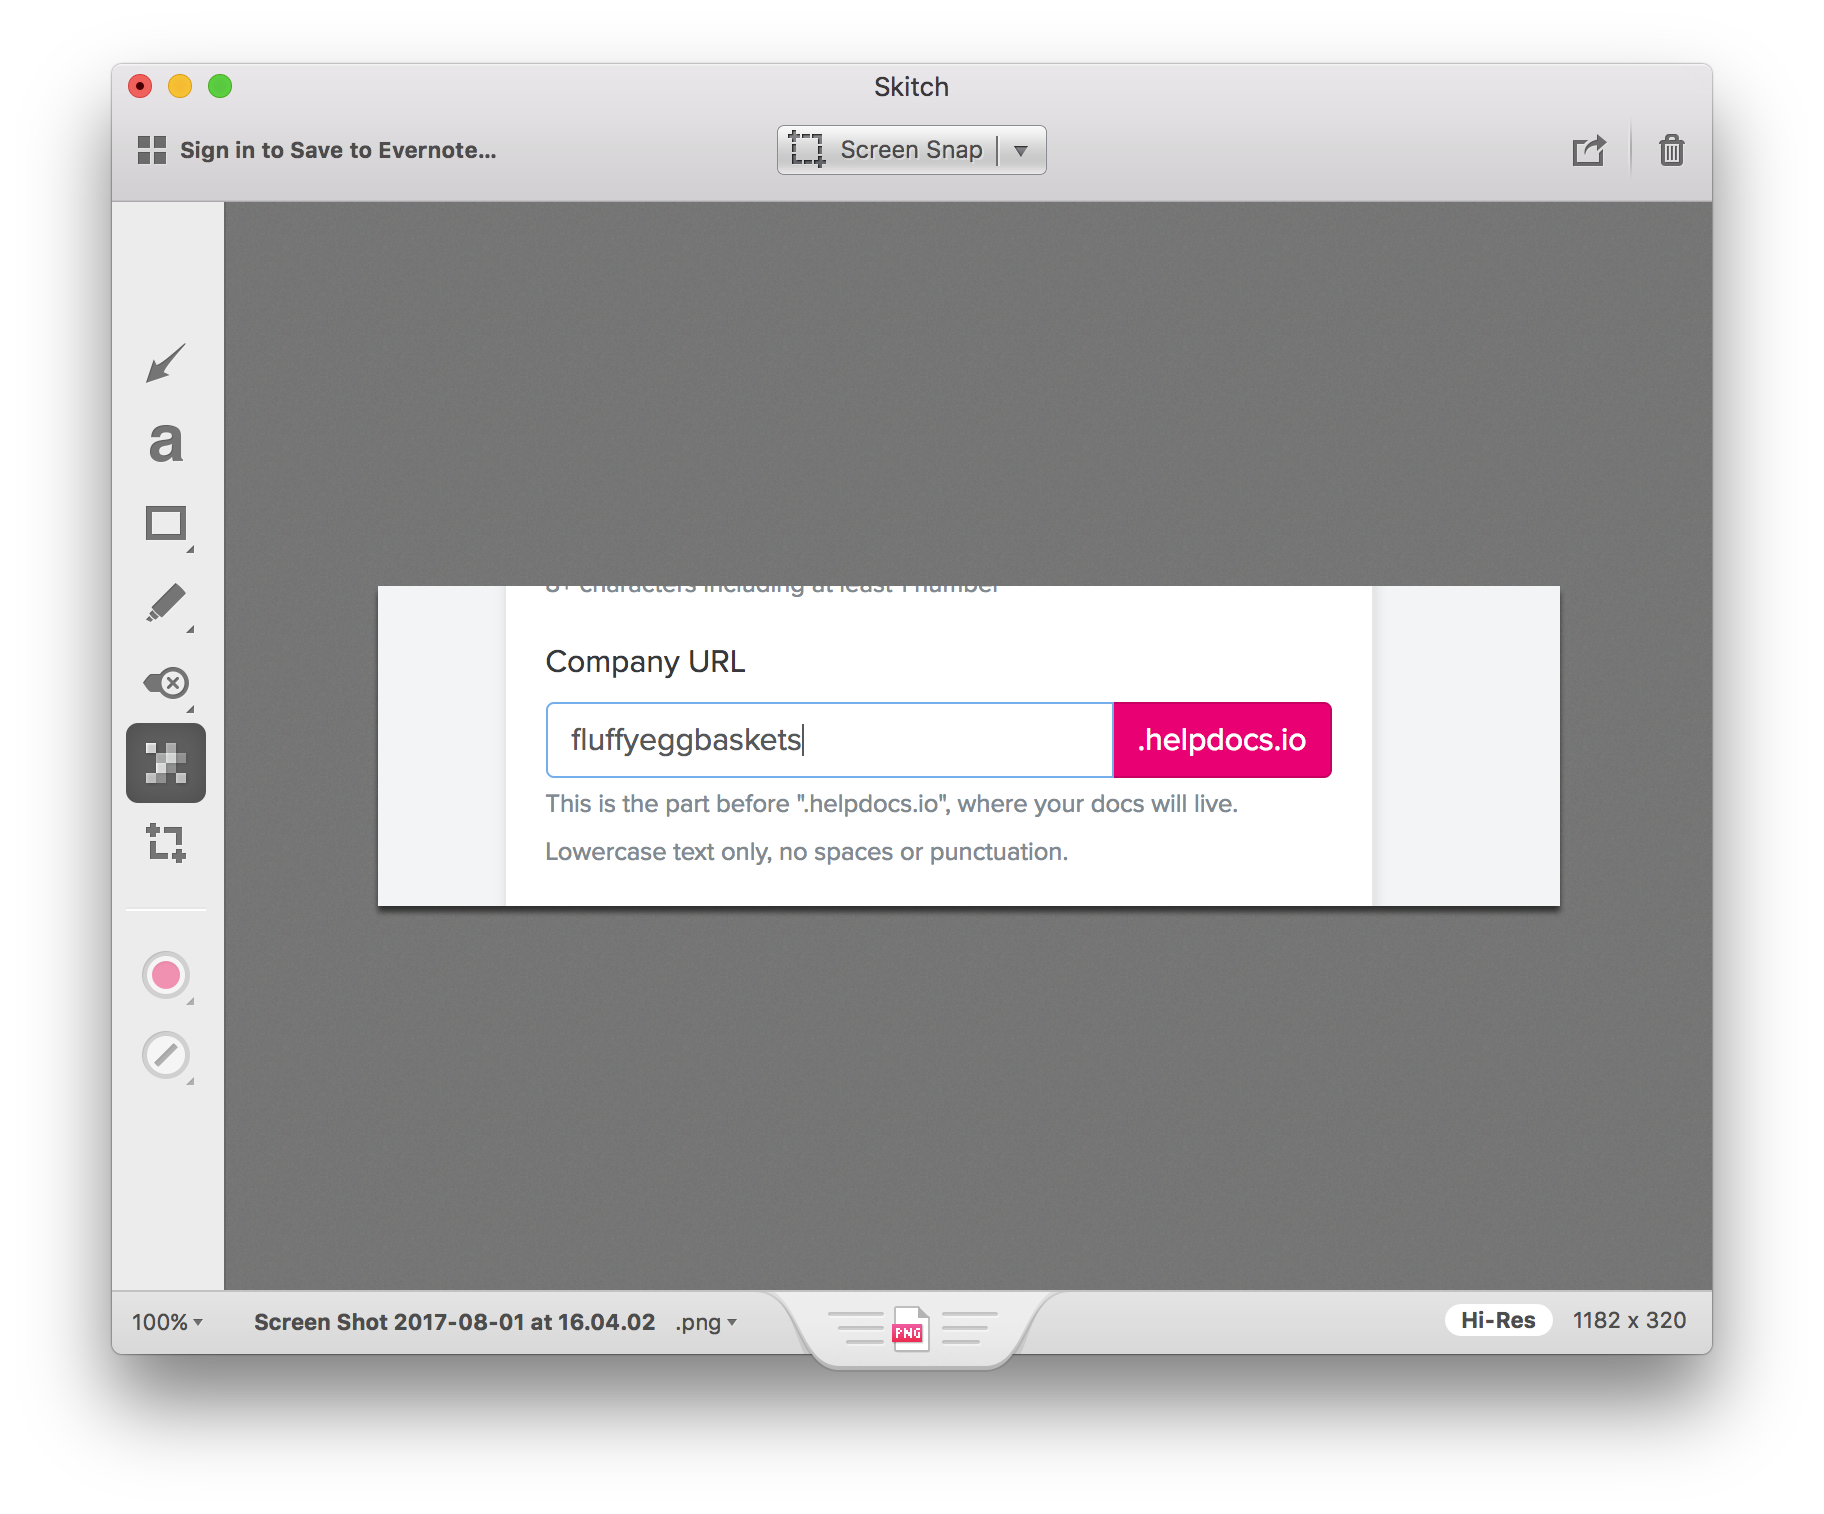 Skitch for image annotation